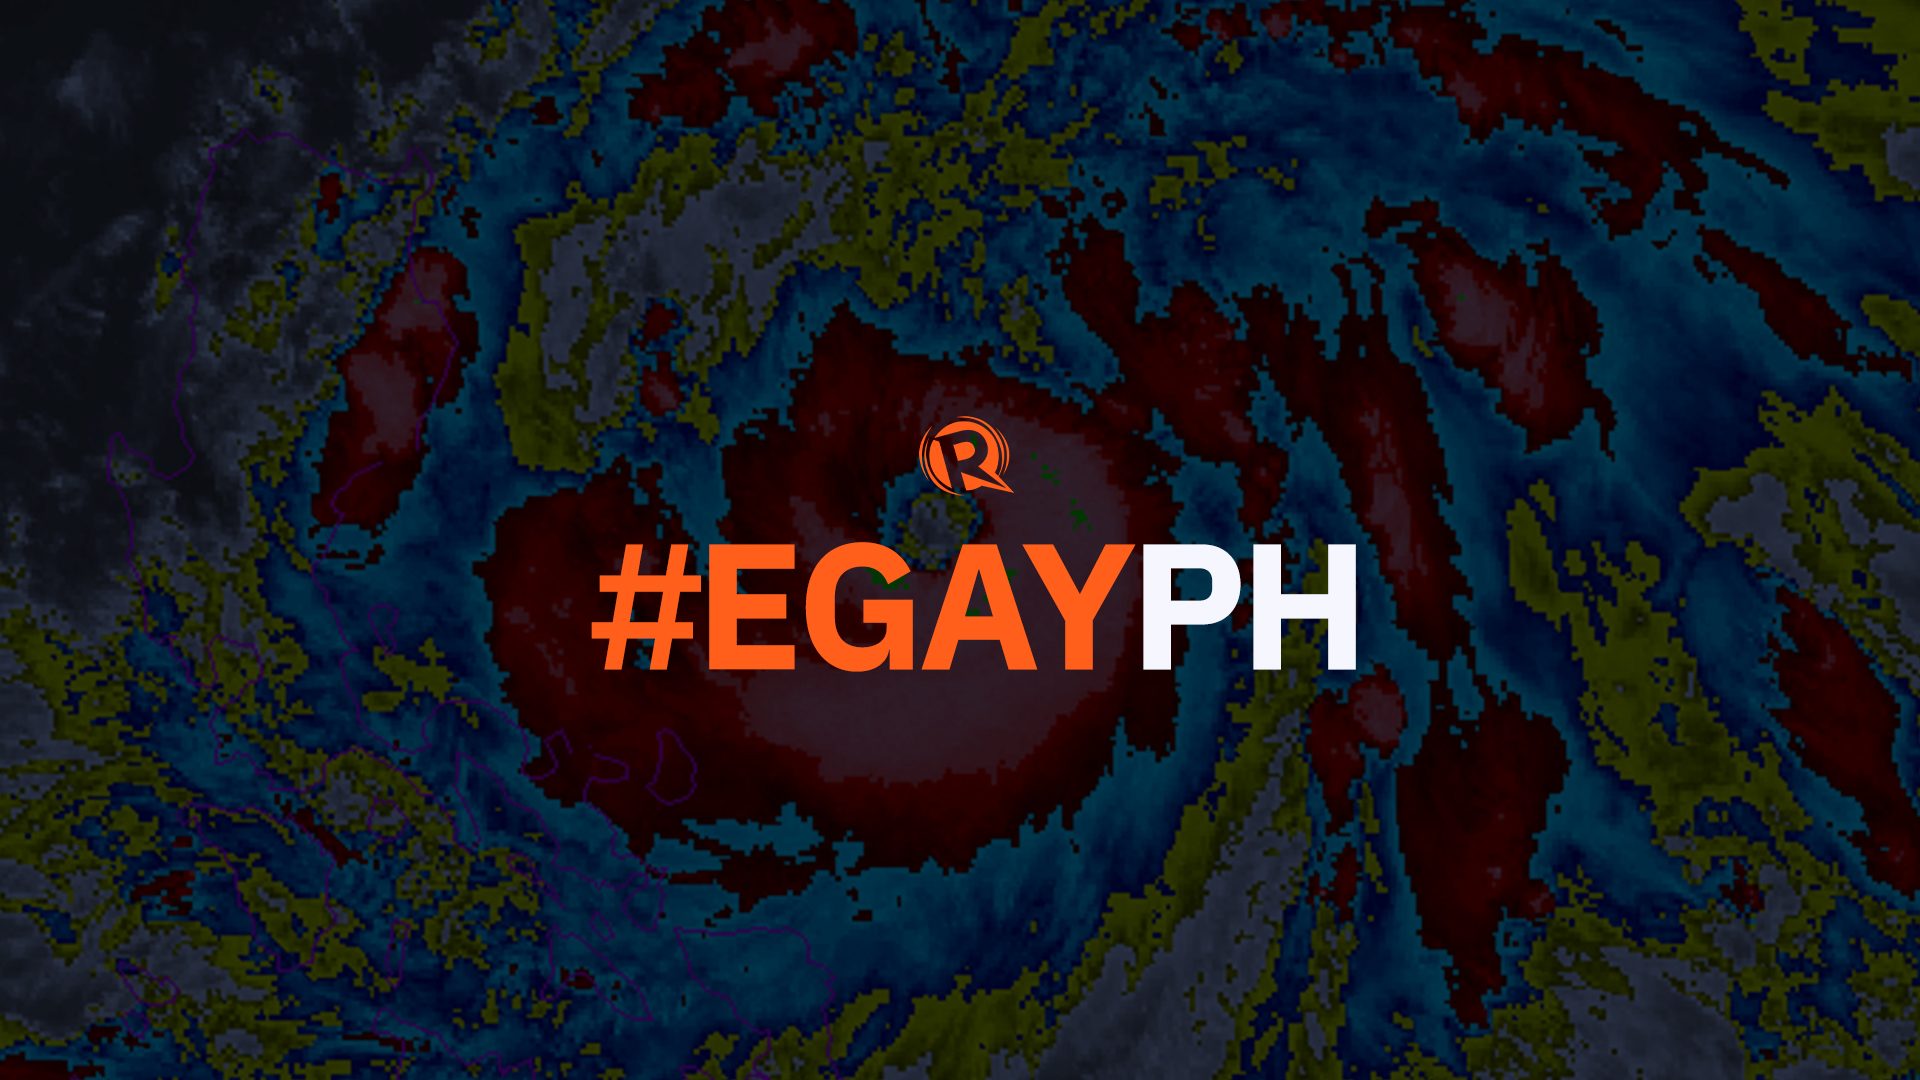 Typhoon Egay: Damage, recovery, relief efforts in the Philippines